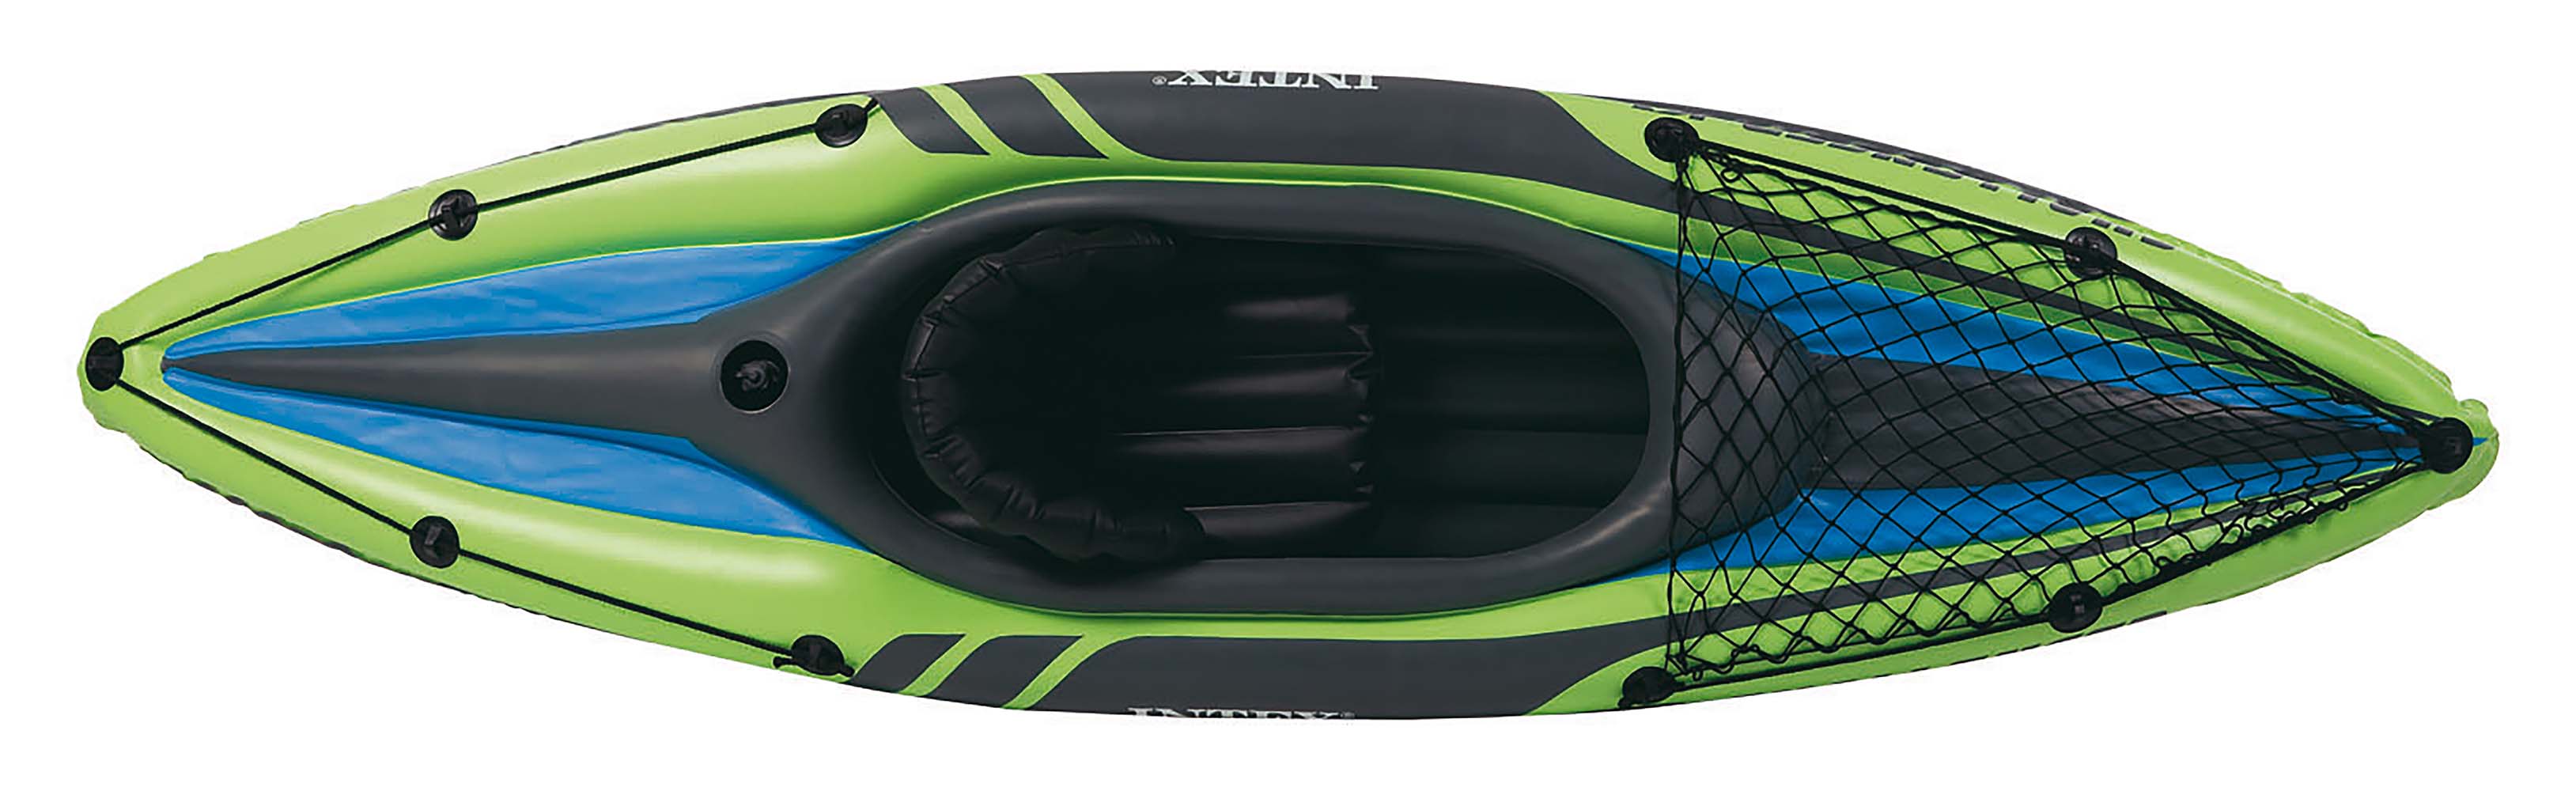 9668305 An extra sturdy inflatable single kayak. A complete set to hit the water right away. Has a handy baggage net and a storage compartment behind the back rest to take the necessary baggage. In addition, this kayak has a fin under the boat for extra manoeuvrability. The kayak has 3 air compartments with a quick-fill/deflate valve. Comes with 2 aluminium paddles, an inflation pump, a repair kit, a grip rope and a handy carrying case.